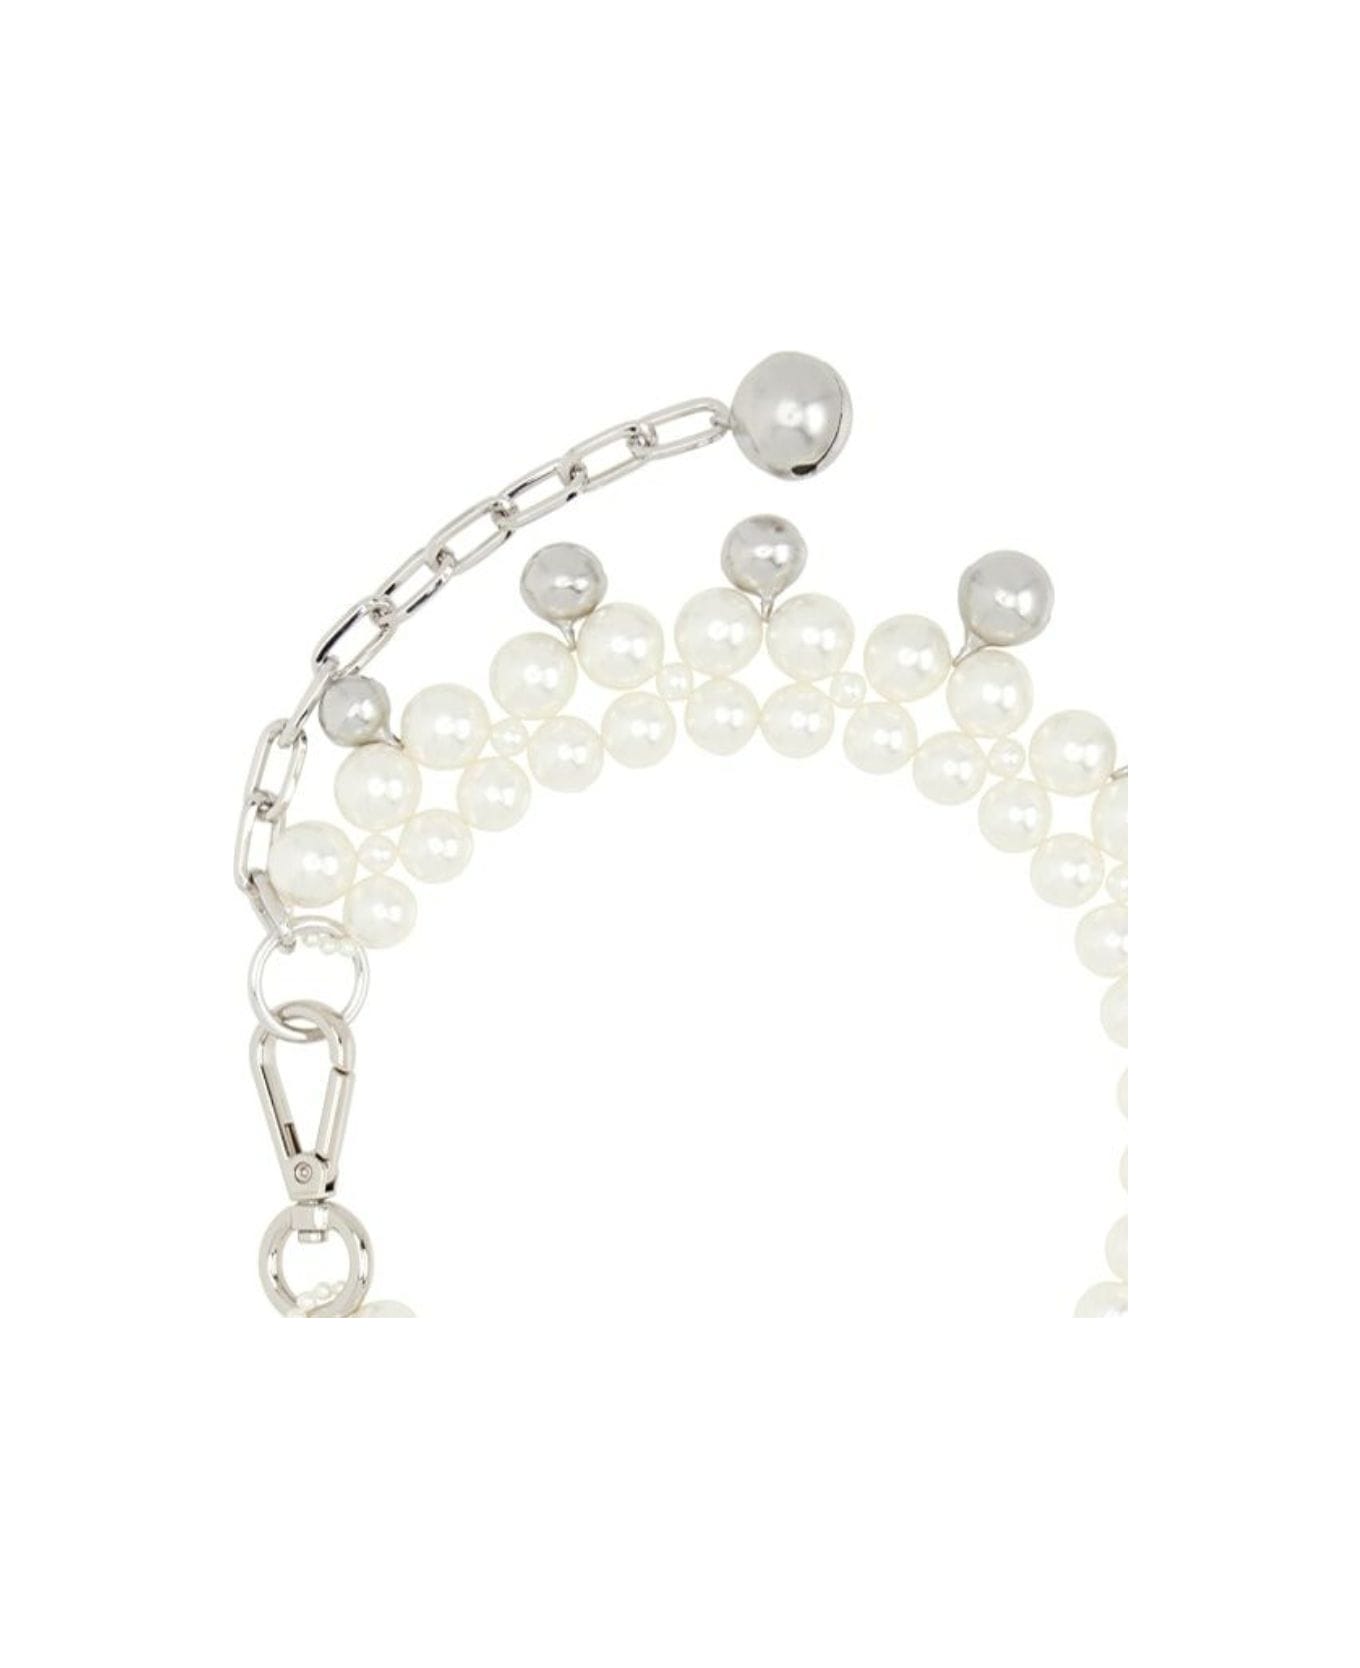 Simone Rocha Double Bell Charm And Pearl Necklace - Pearl